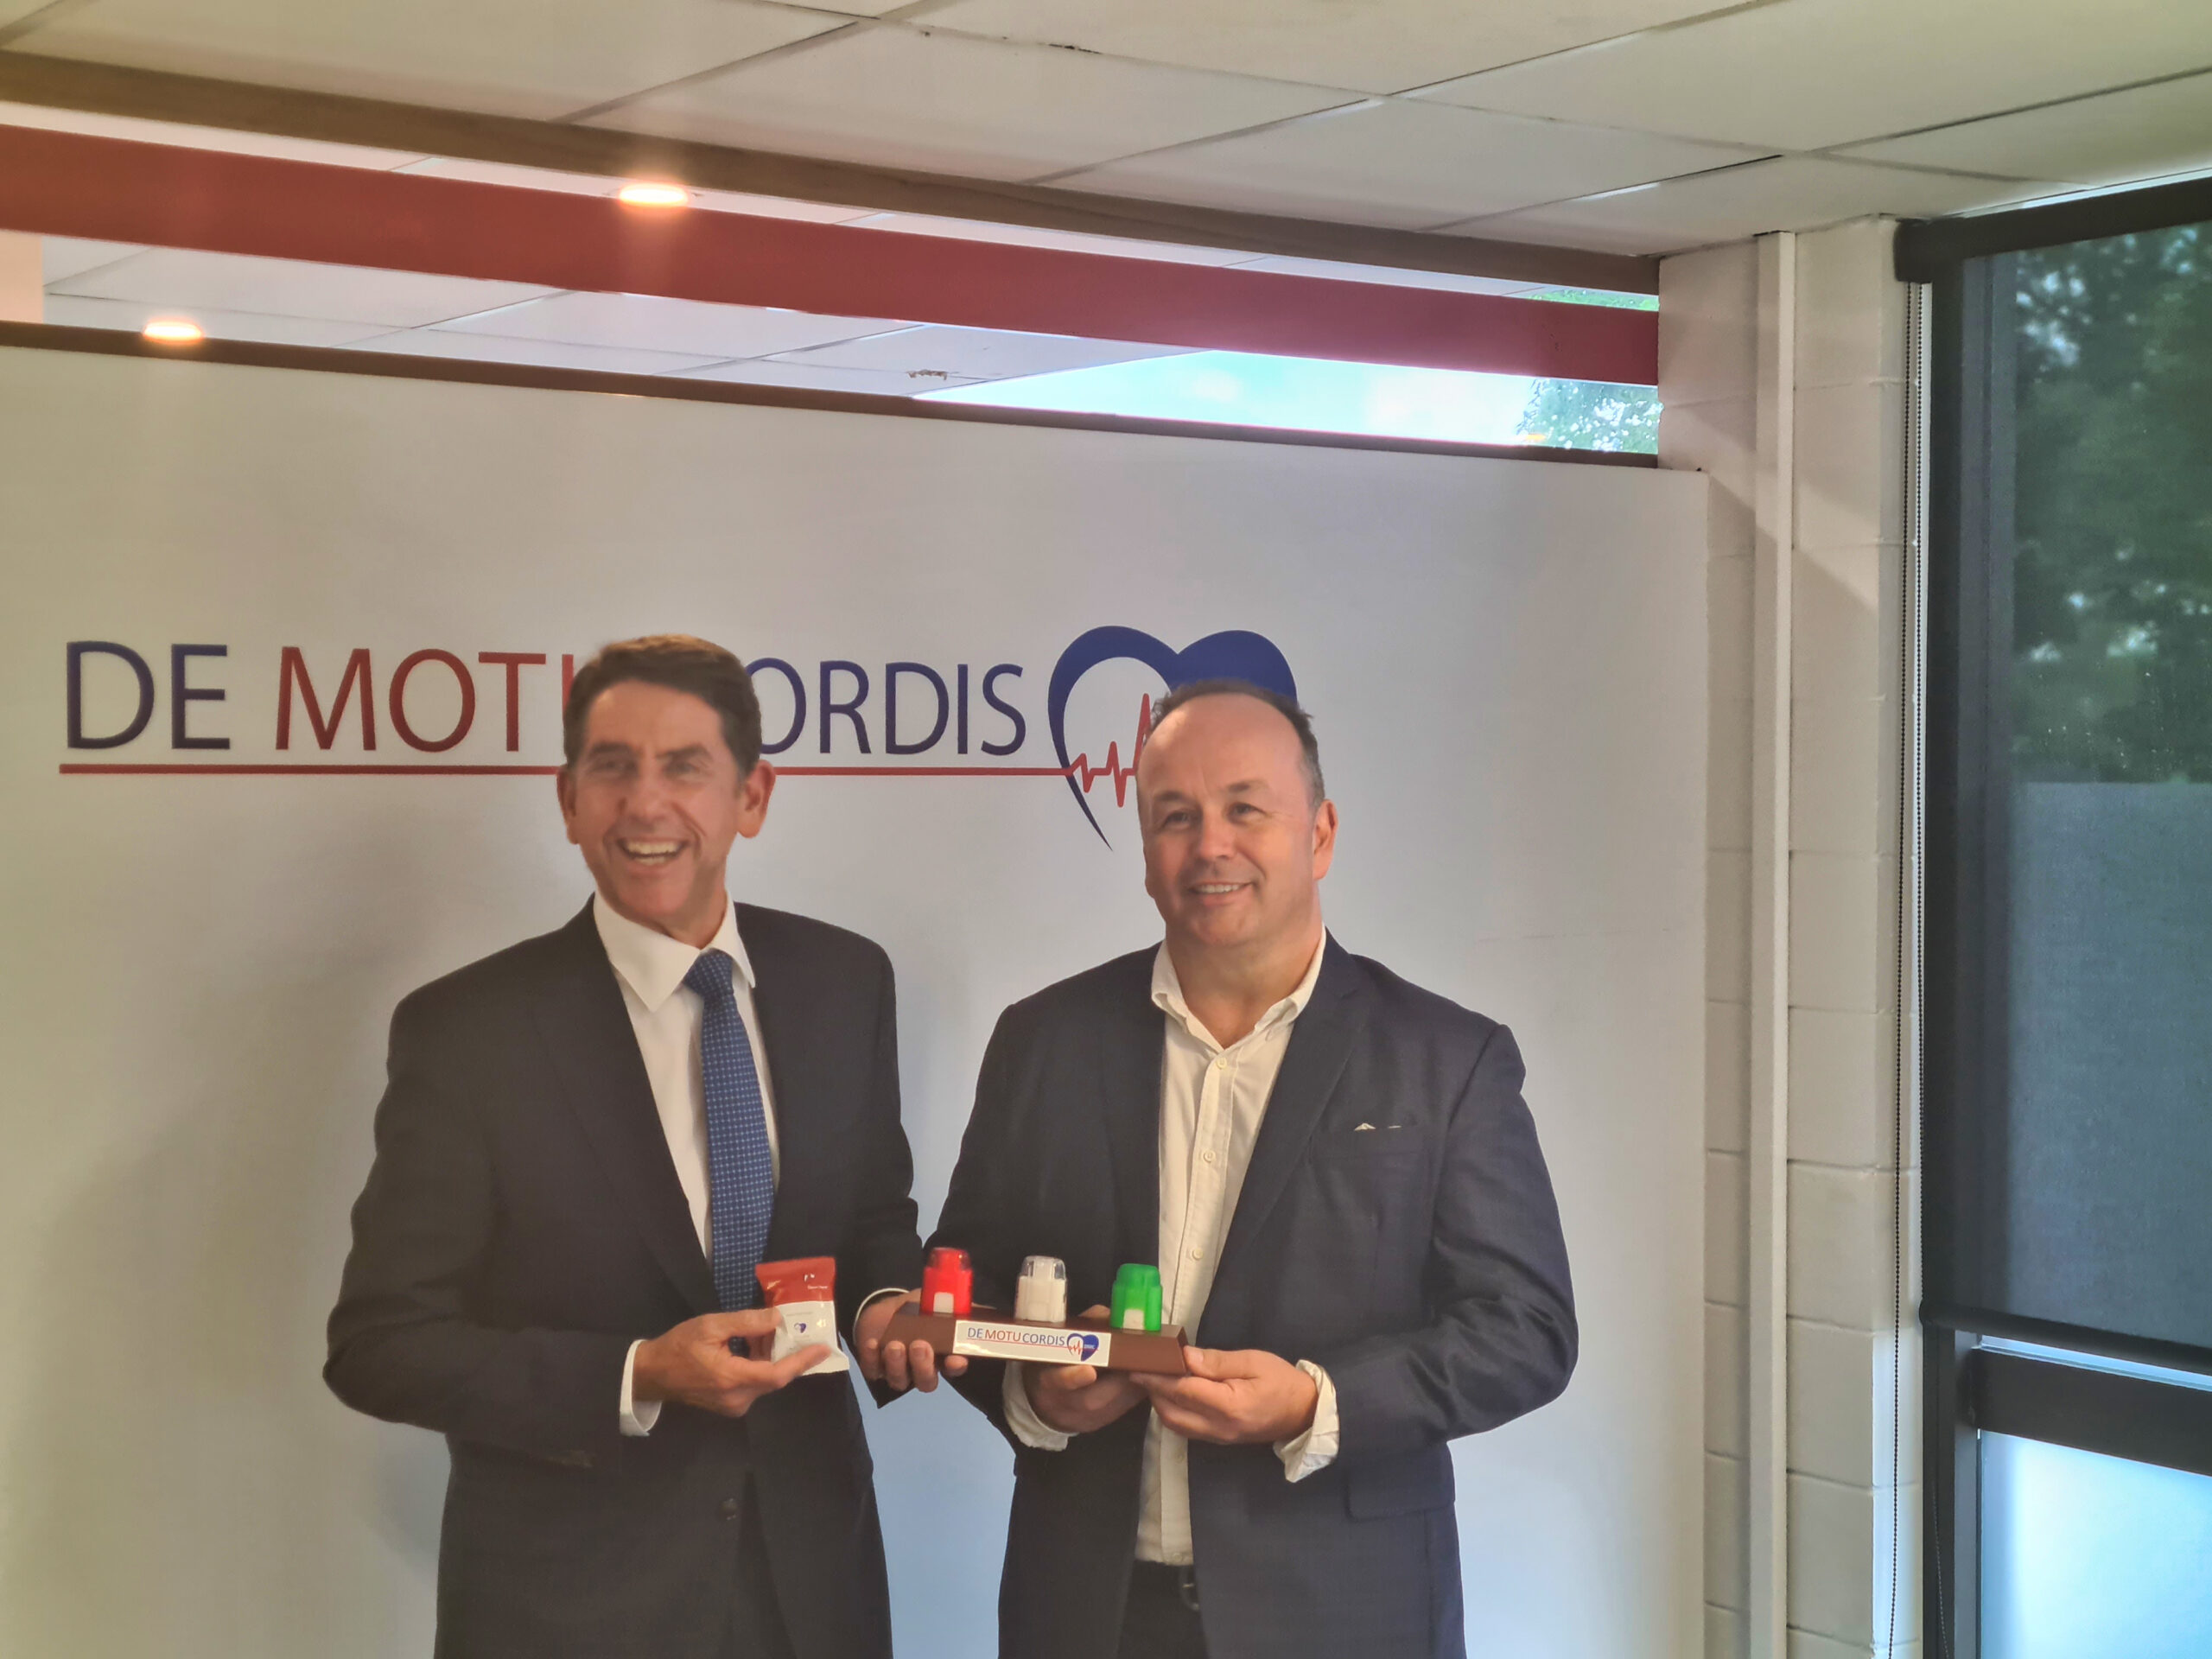 De Motu Cordis (DMC) welcomed Queensland Treasurer and Minister for Trade and Investment Honourable Cameron Dick MP